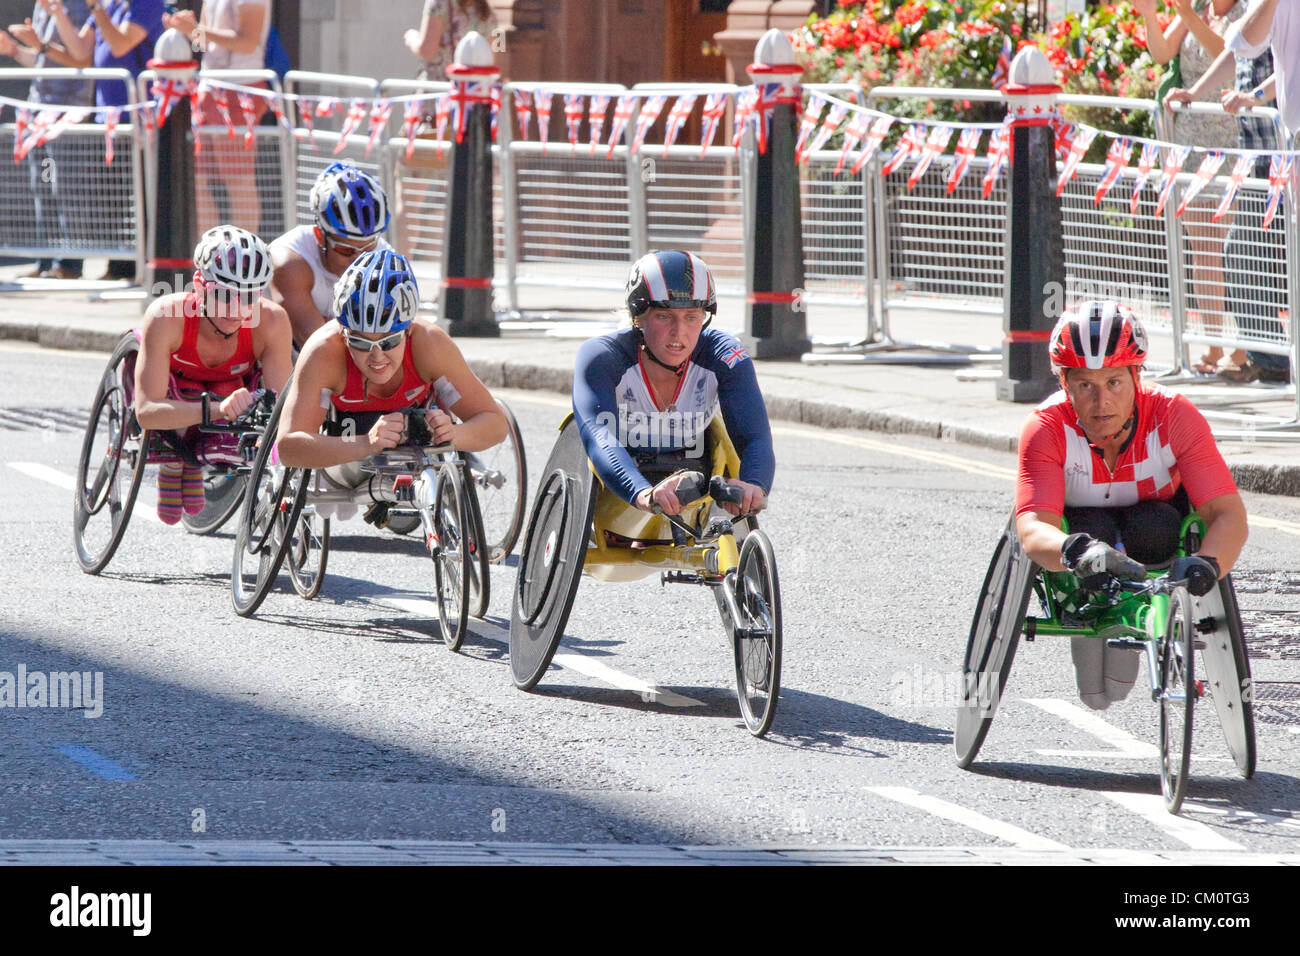 London, UK. 9th September 2012. Racing along Warwick lane near St. Pauls Cathedral in the City of London, right to left  Sandra Graf (Swiss, Gold Medal WInner), Shelly Woods (Team GB, Silver) , USA's Shirley Reilly (Gold Medal Winner), USA's Amanda McGrory (4th), unknown Stock Photo